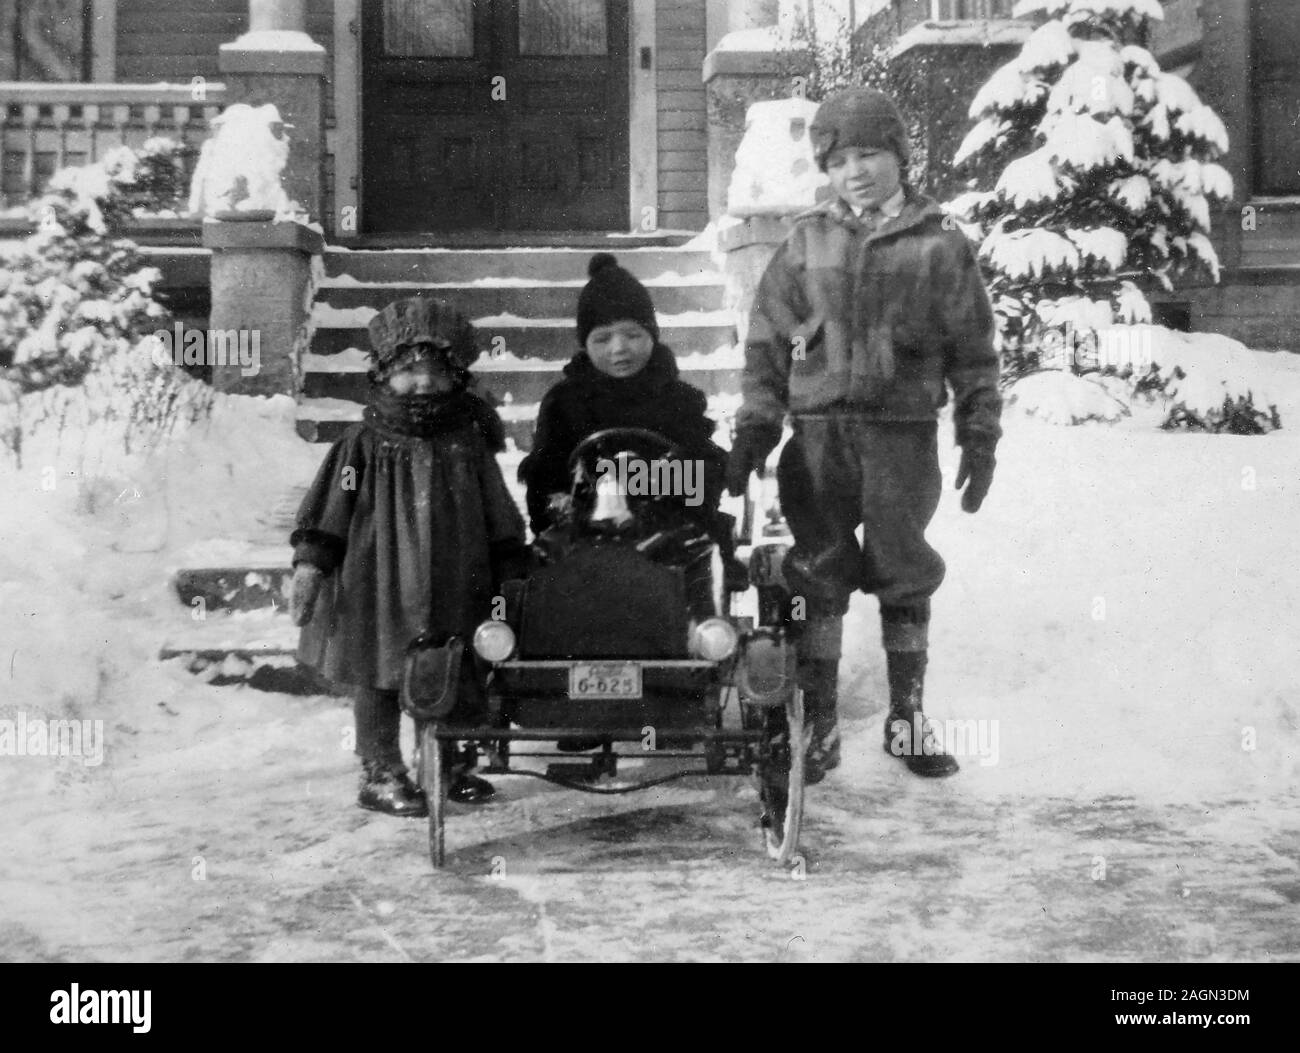 Three children bundled up for a cold day play with their period toy automobile, ca. 1925. Stock Photo